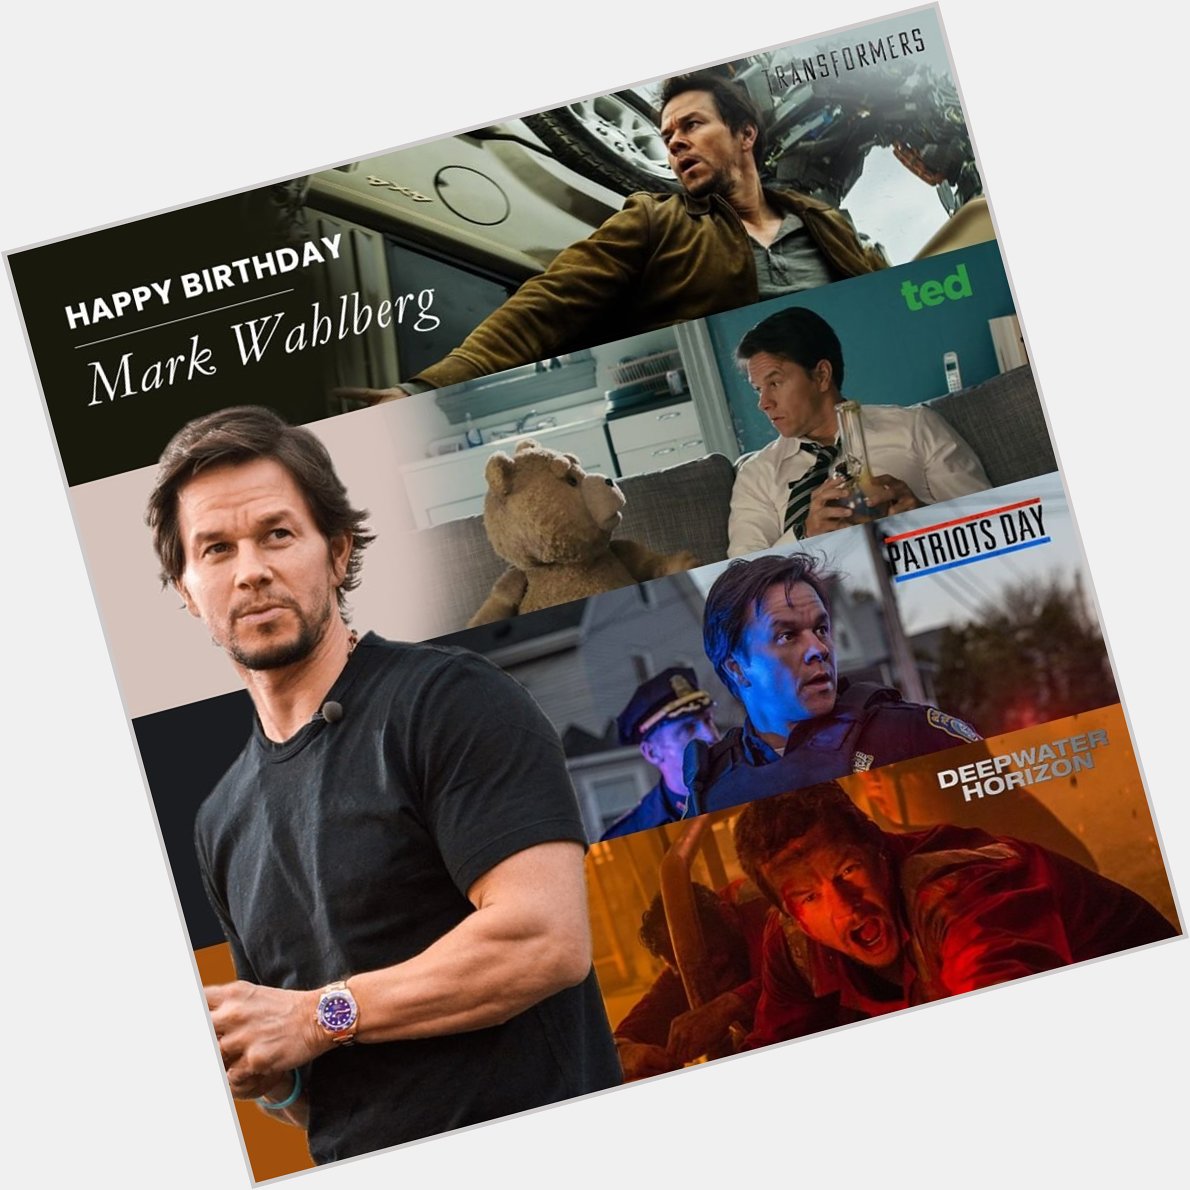 Happy Birthday Mark Wahlberg! What\s your favorite Wahlberg film? 